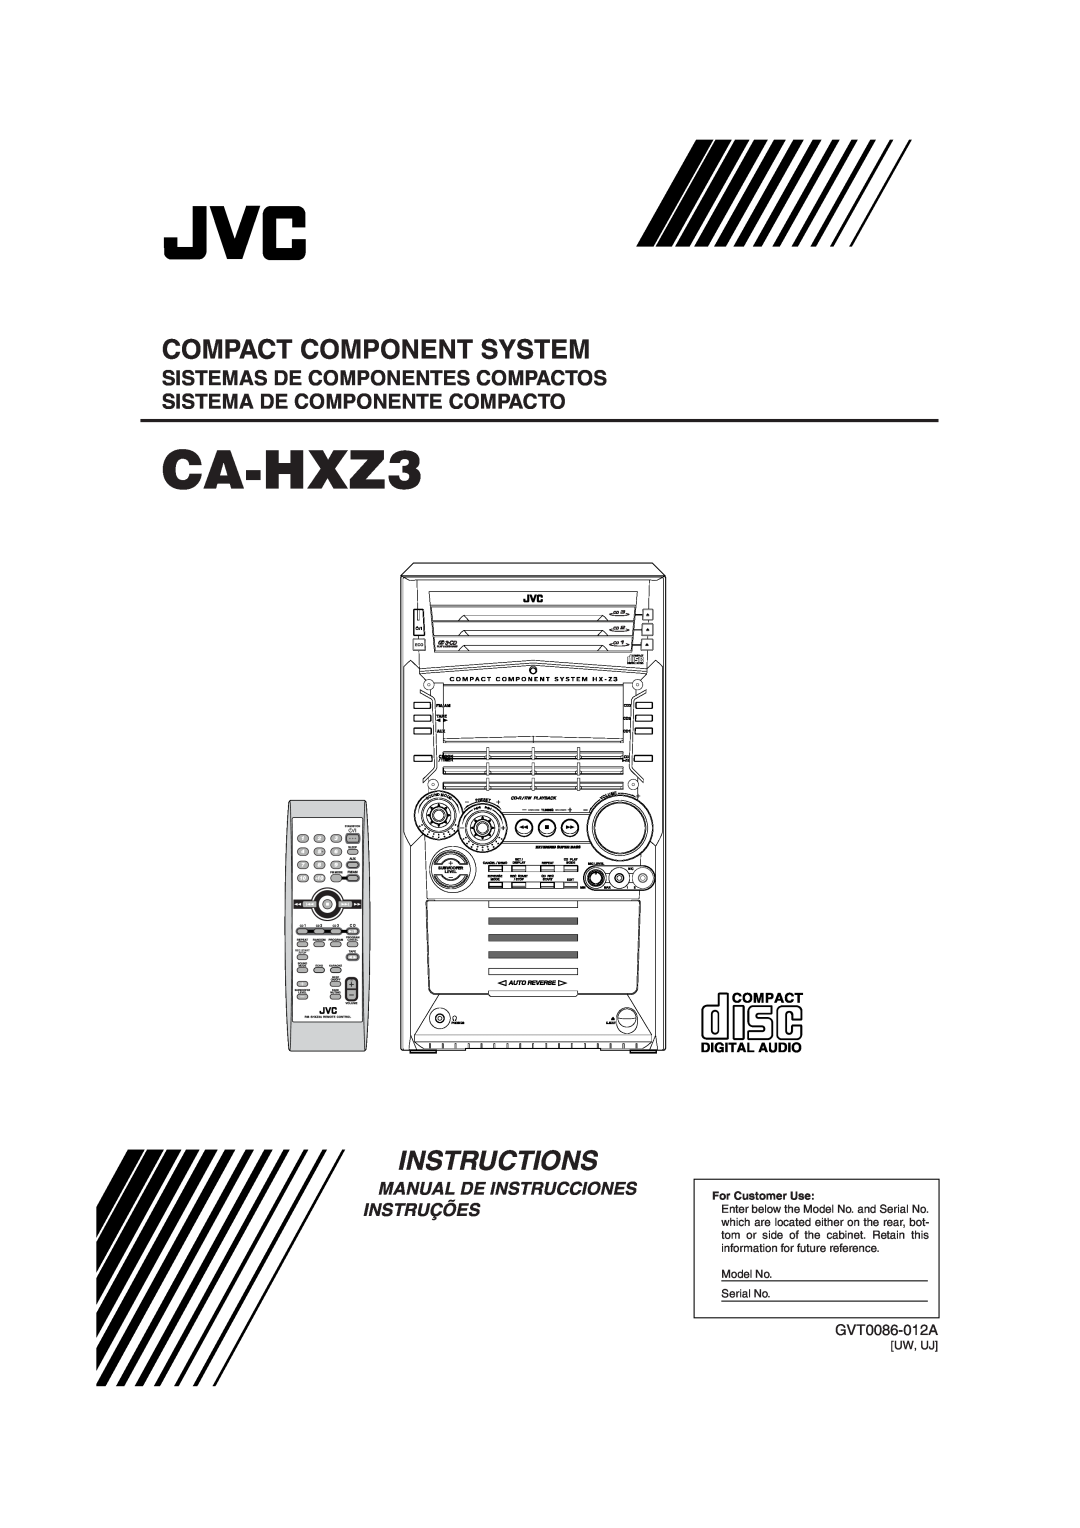 JVC CA-HXZ3 manual Compact Component System, Instructions, For Customer Use, Model No Serial No, Eset, Olume 